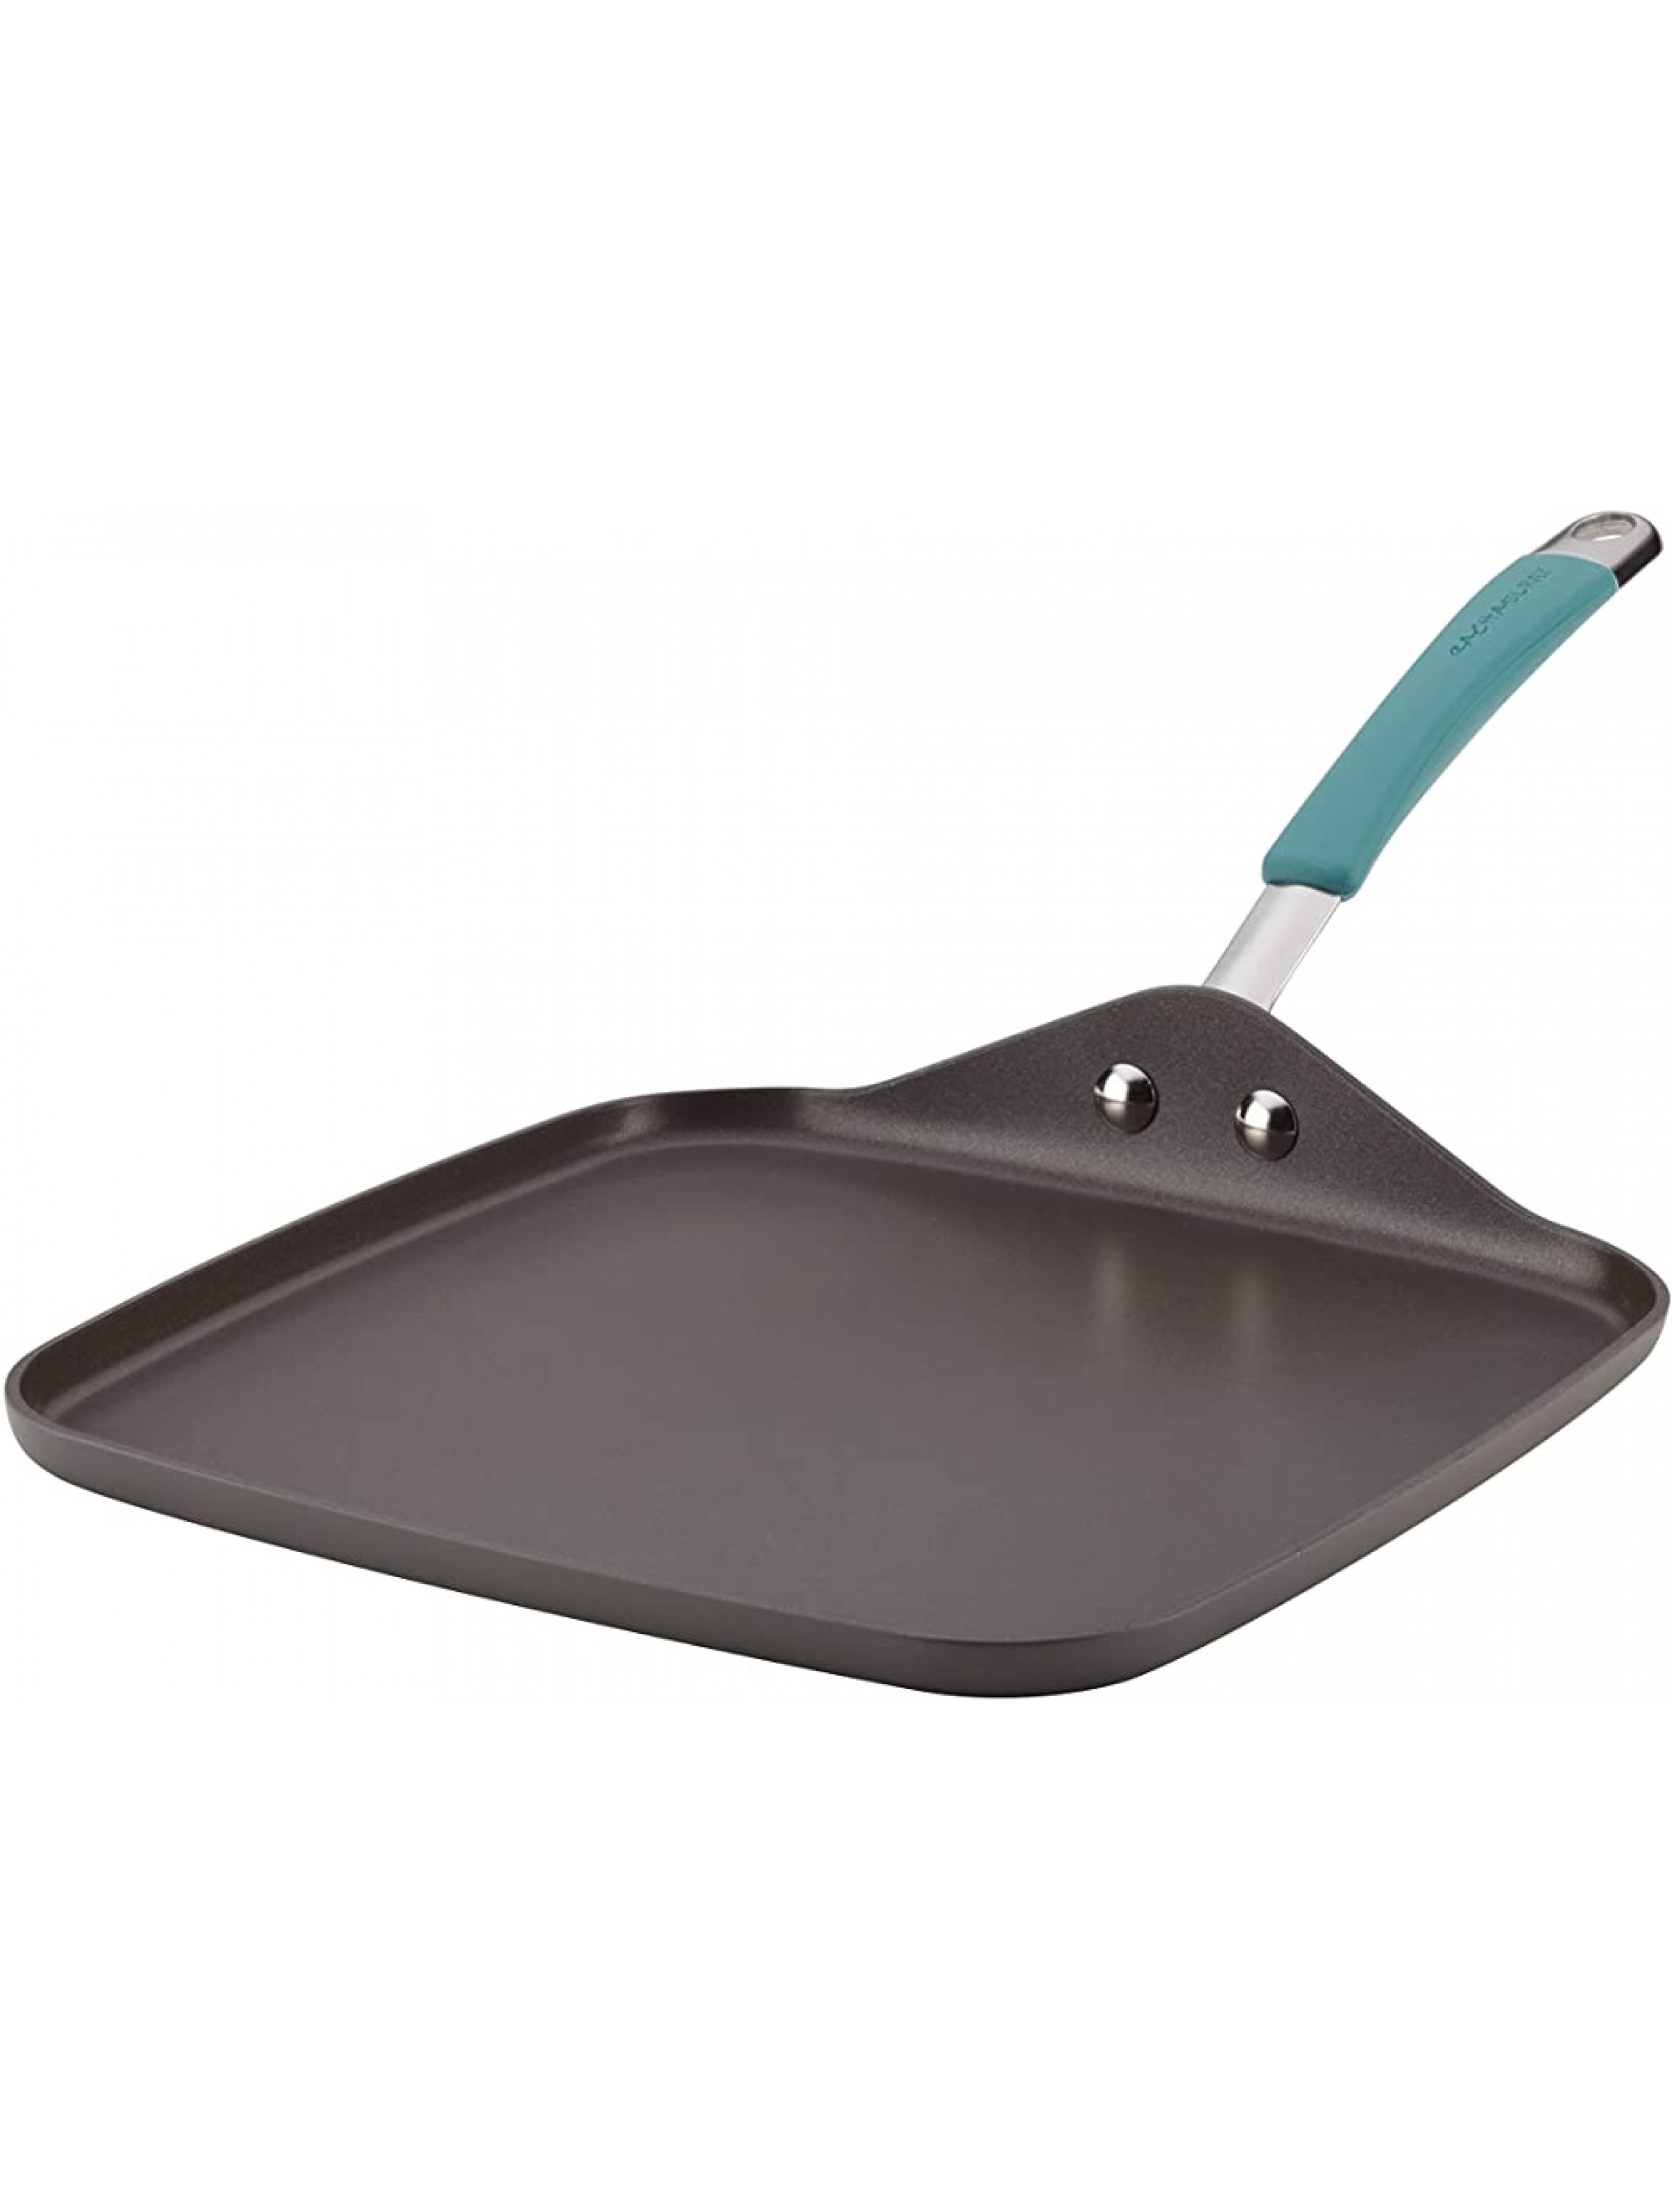 Rachael Ray Cucina Hard Anodized Nonstick Griddle Pan Flat Grill 11 Inch Gray with Agave Blue Handle - BDQOE9CNI